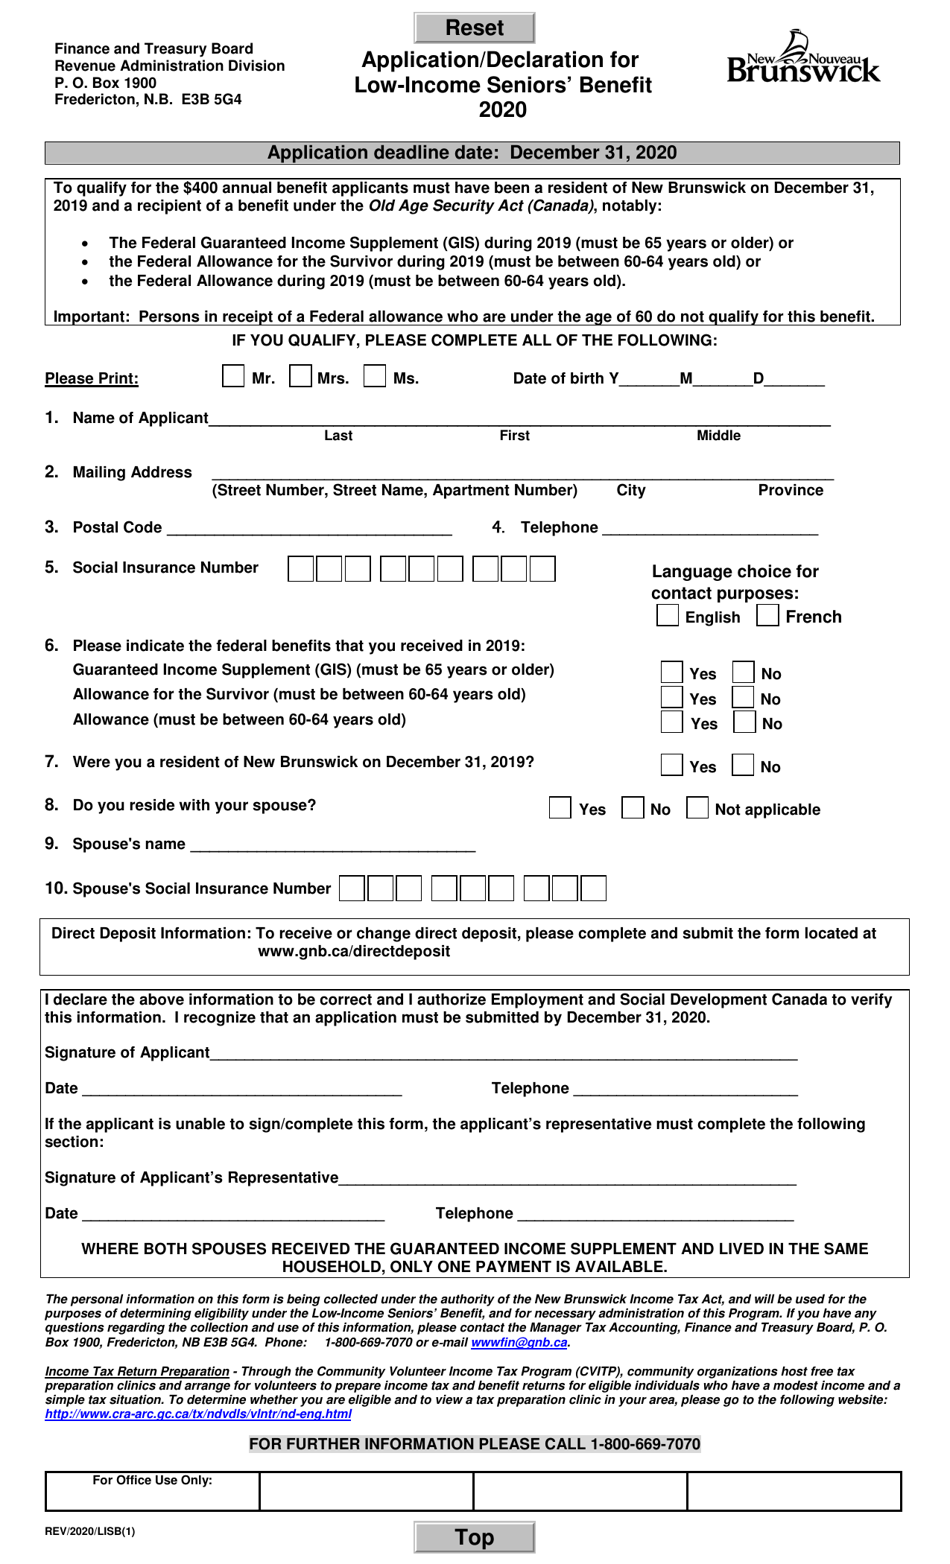 Application / Declaration for Low-Income Seniors Benefit - New Brunswick, Canada, Page 1